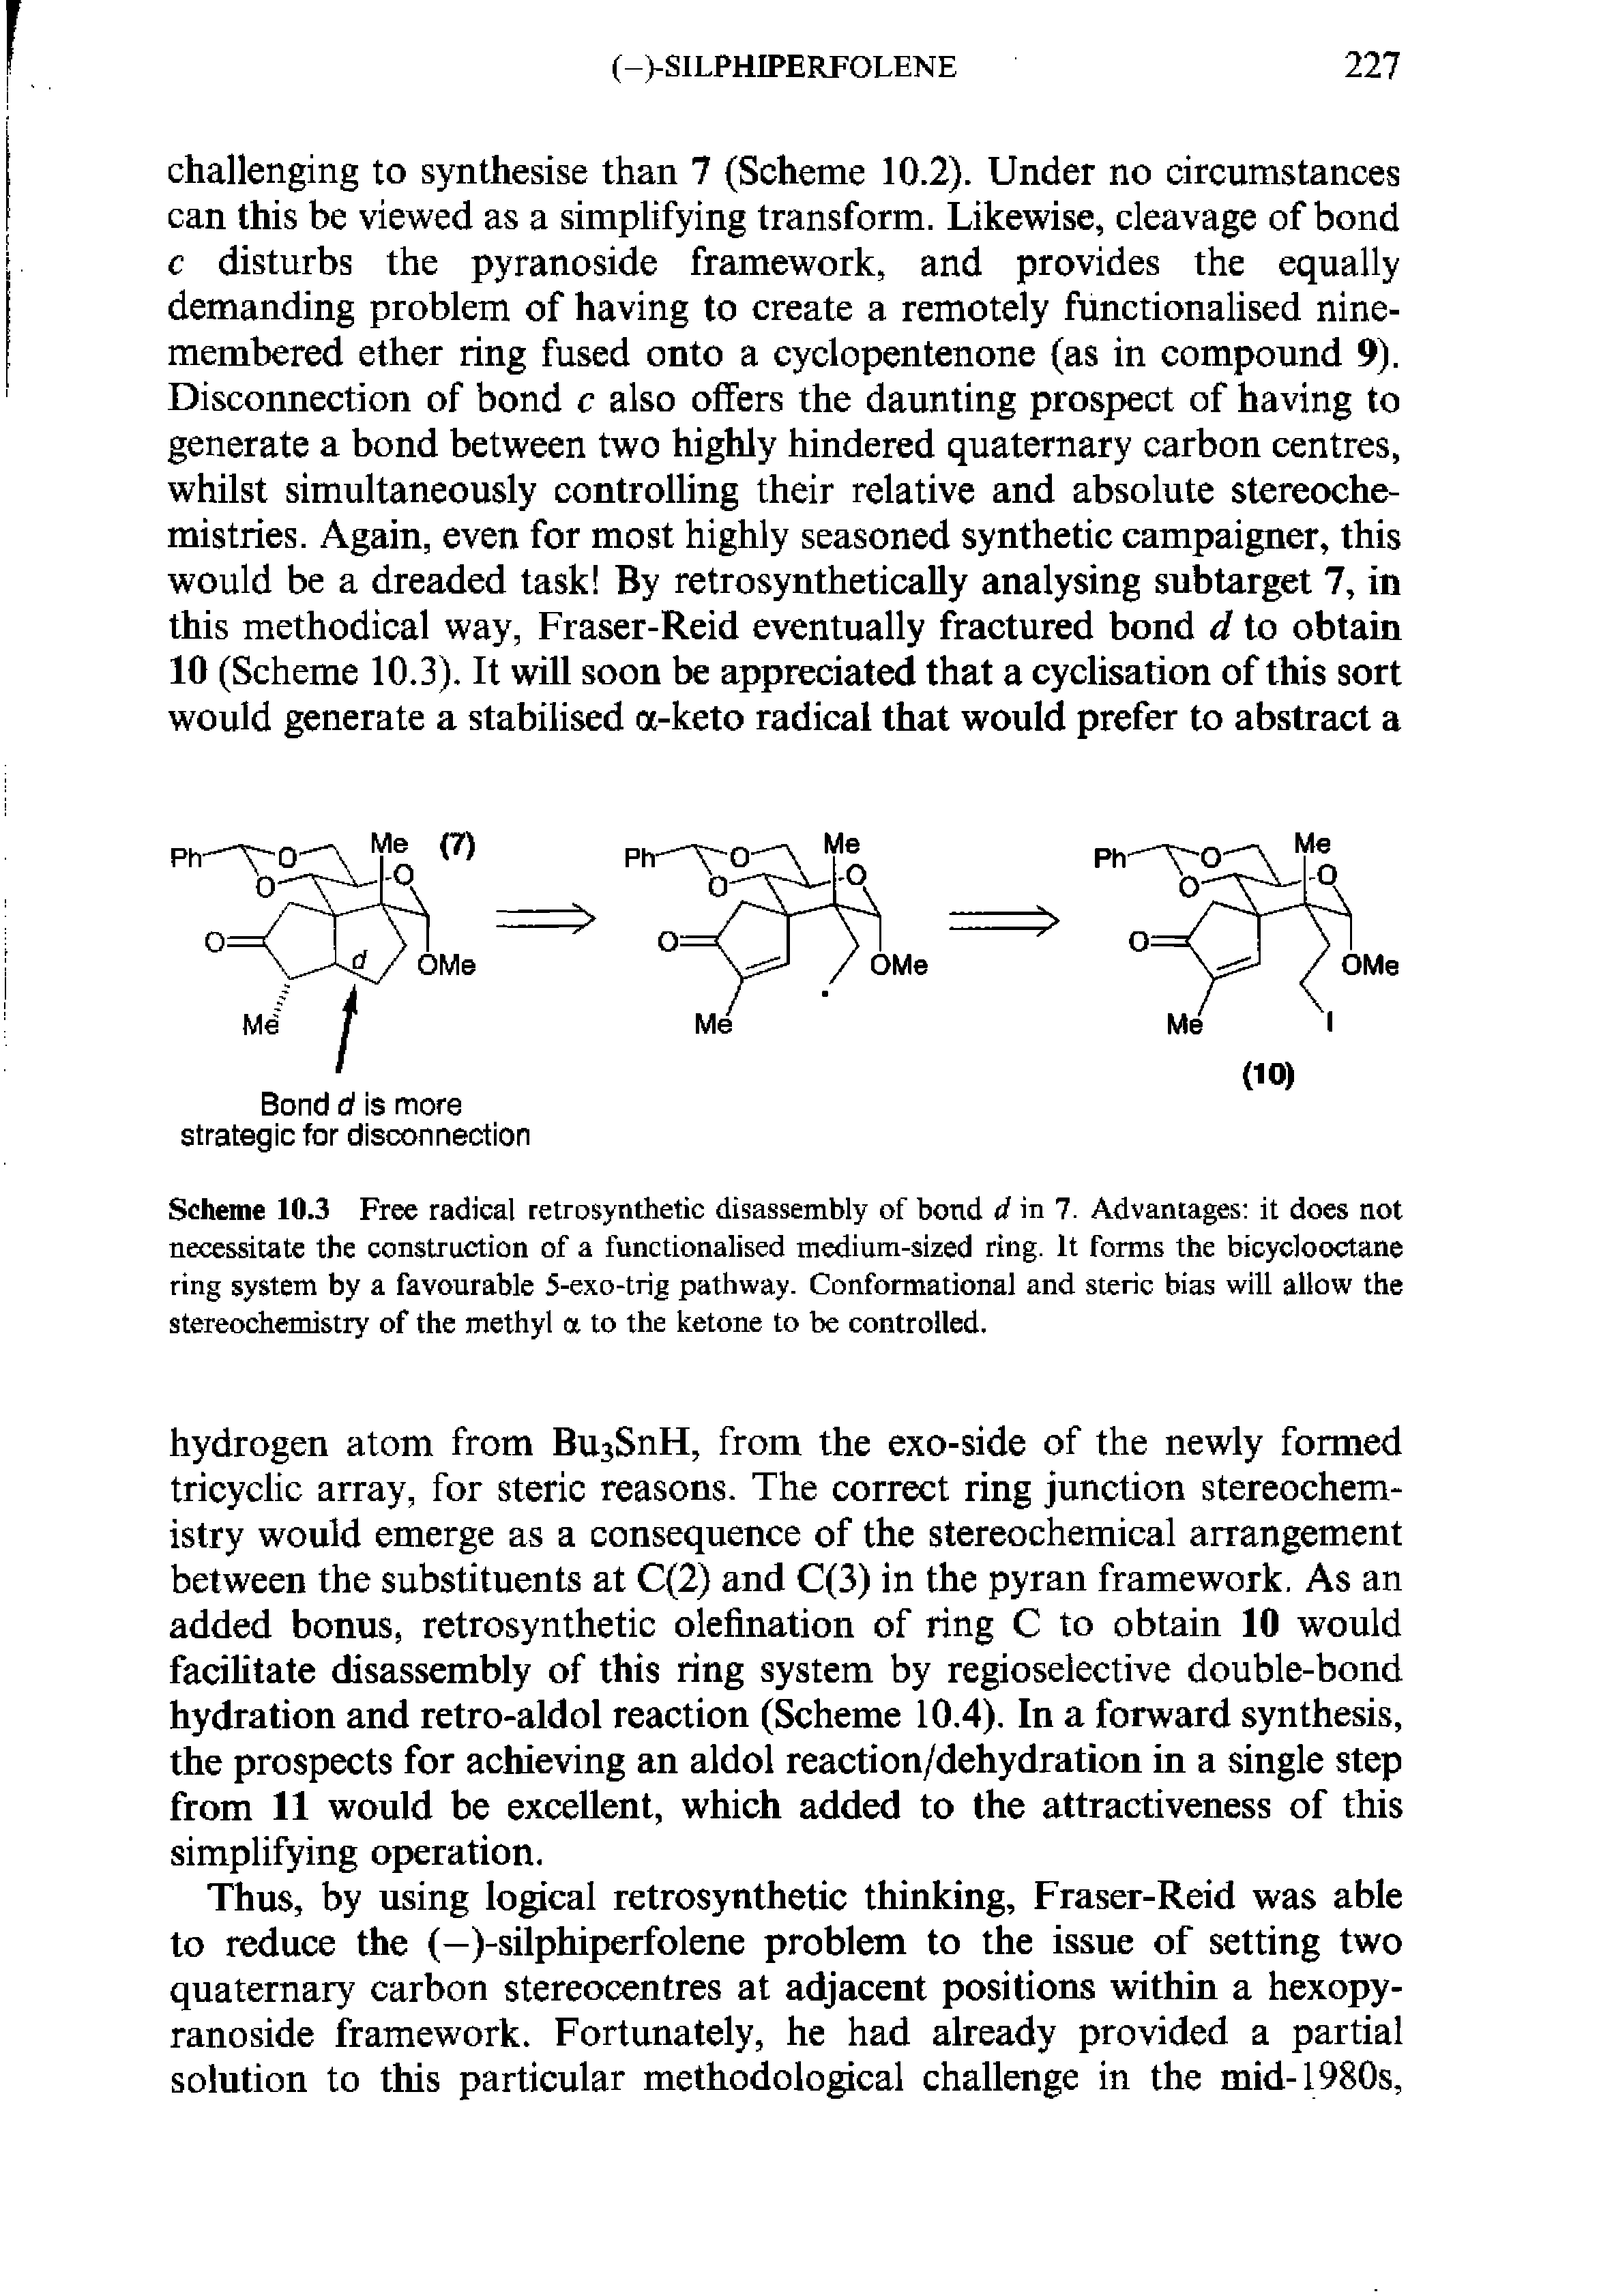 Scheme 10.3 Free radical retrosynthetic disassembly of bond d in 7. Advantages it does not necessitate the construction of a functionalised medium-sized ring. It forms the bicyclooctane ring system by a favourable 5-exo-trig pathway. Conformational and steric bias will allow the stereochemistry of the methyl a to the ketone to be controlled.